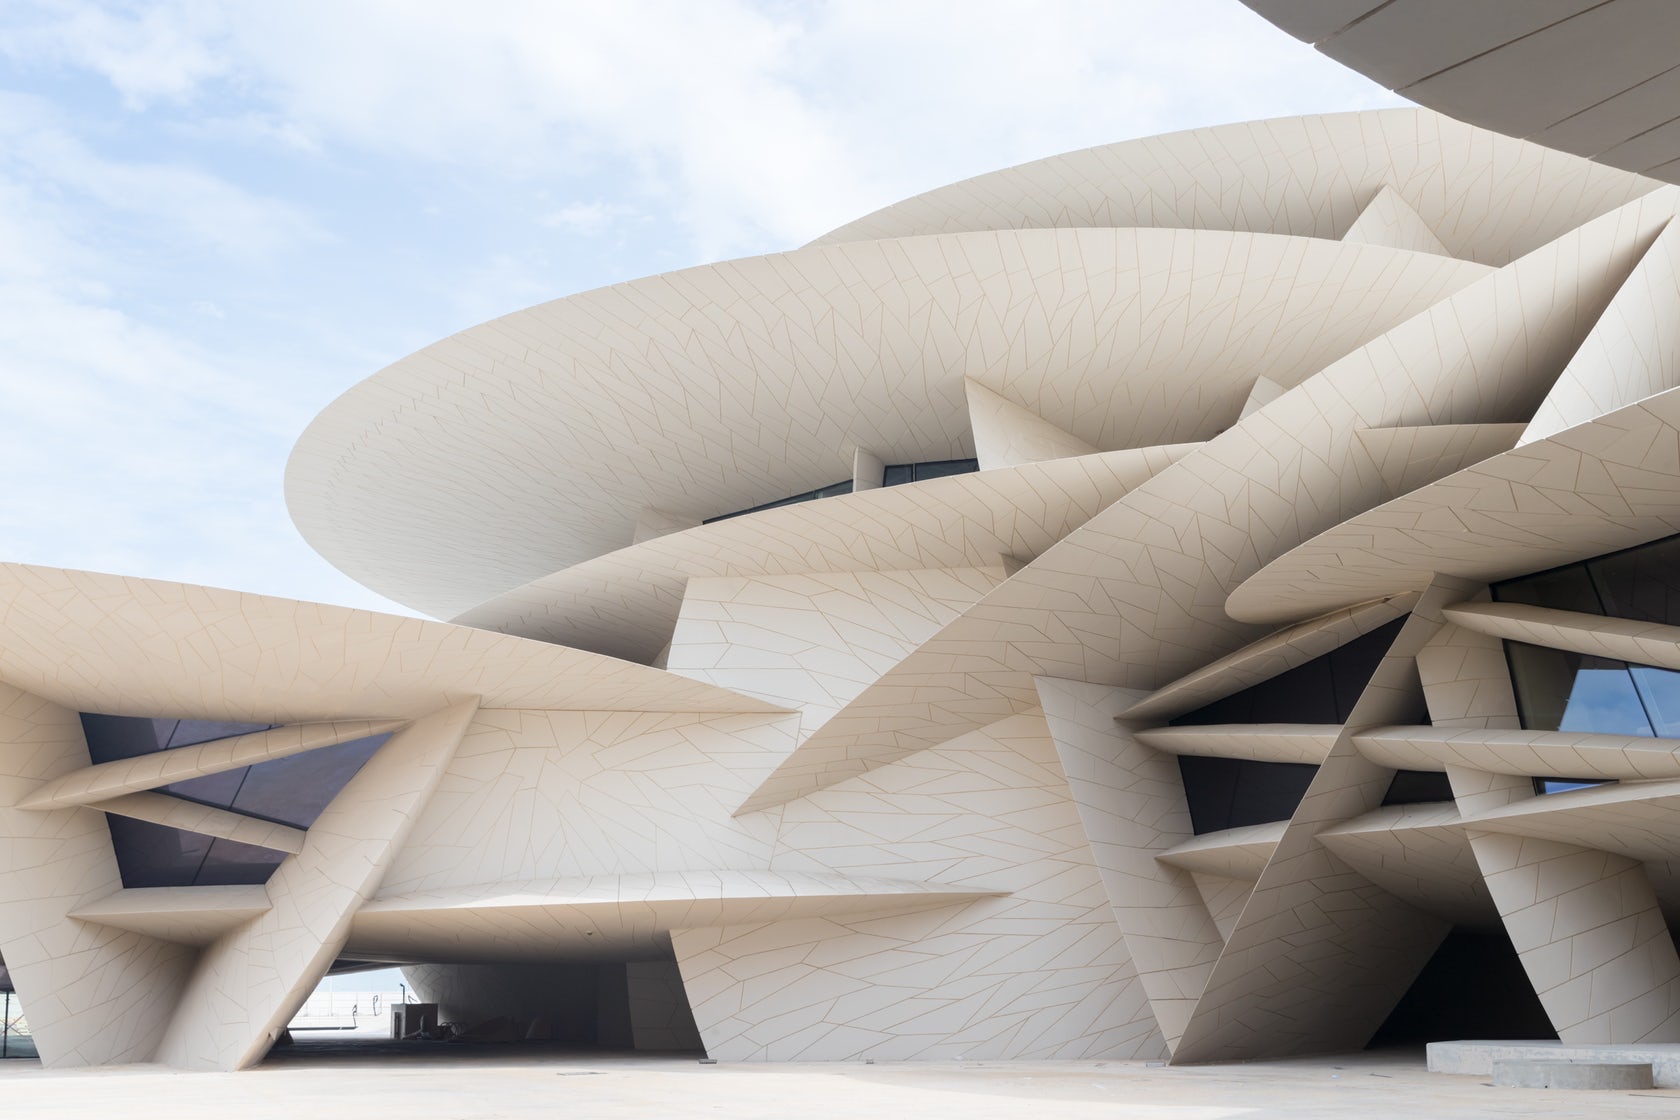 Jean Nouvel Presents National Museum Of Qatar in Doha